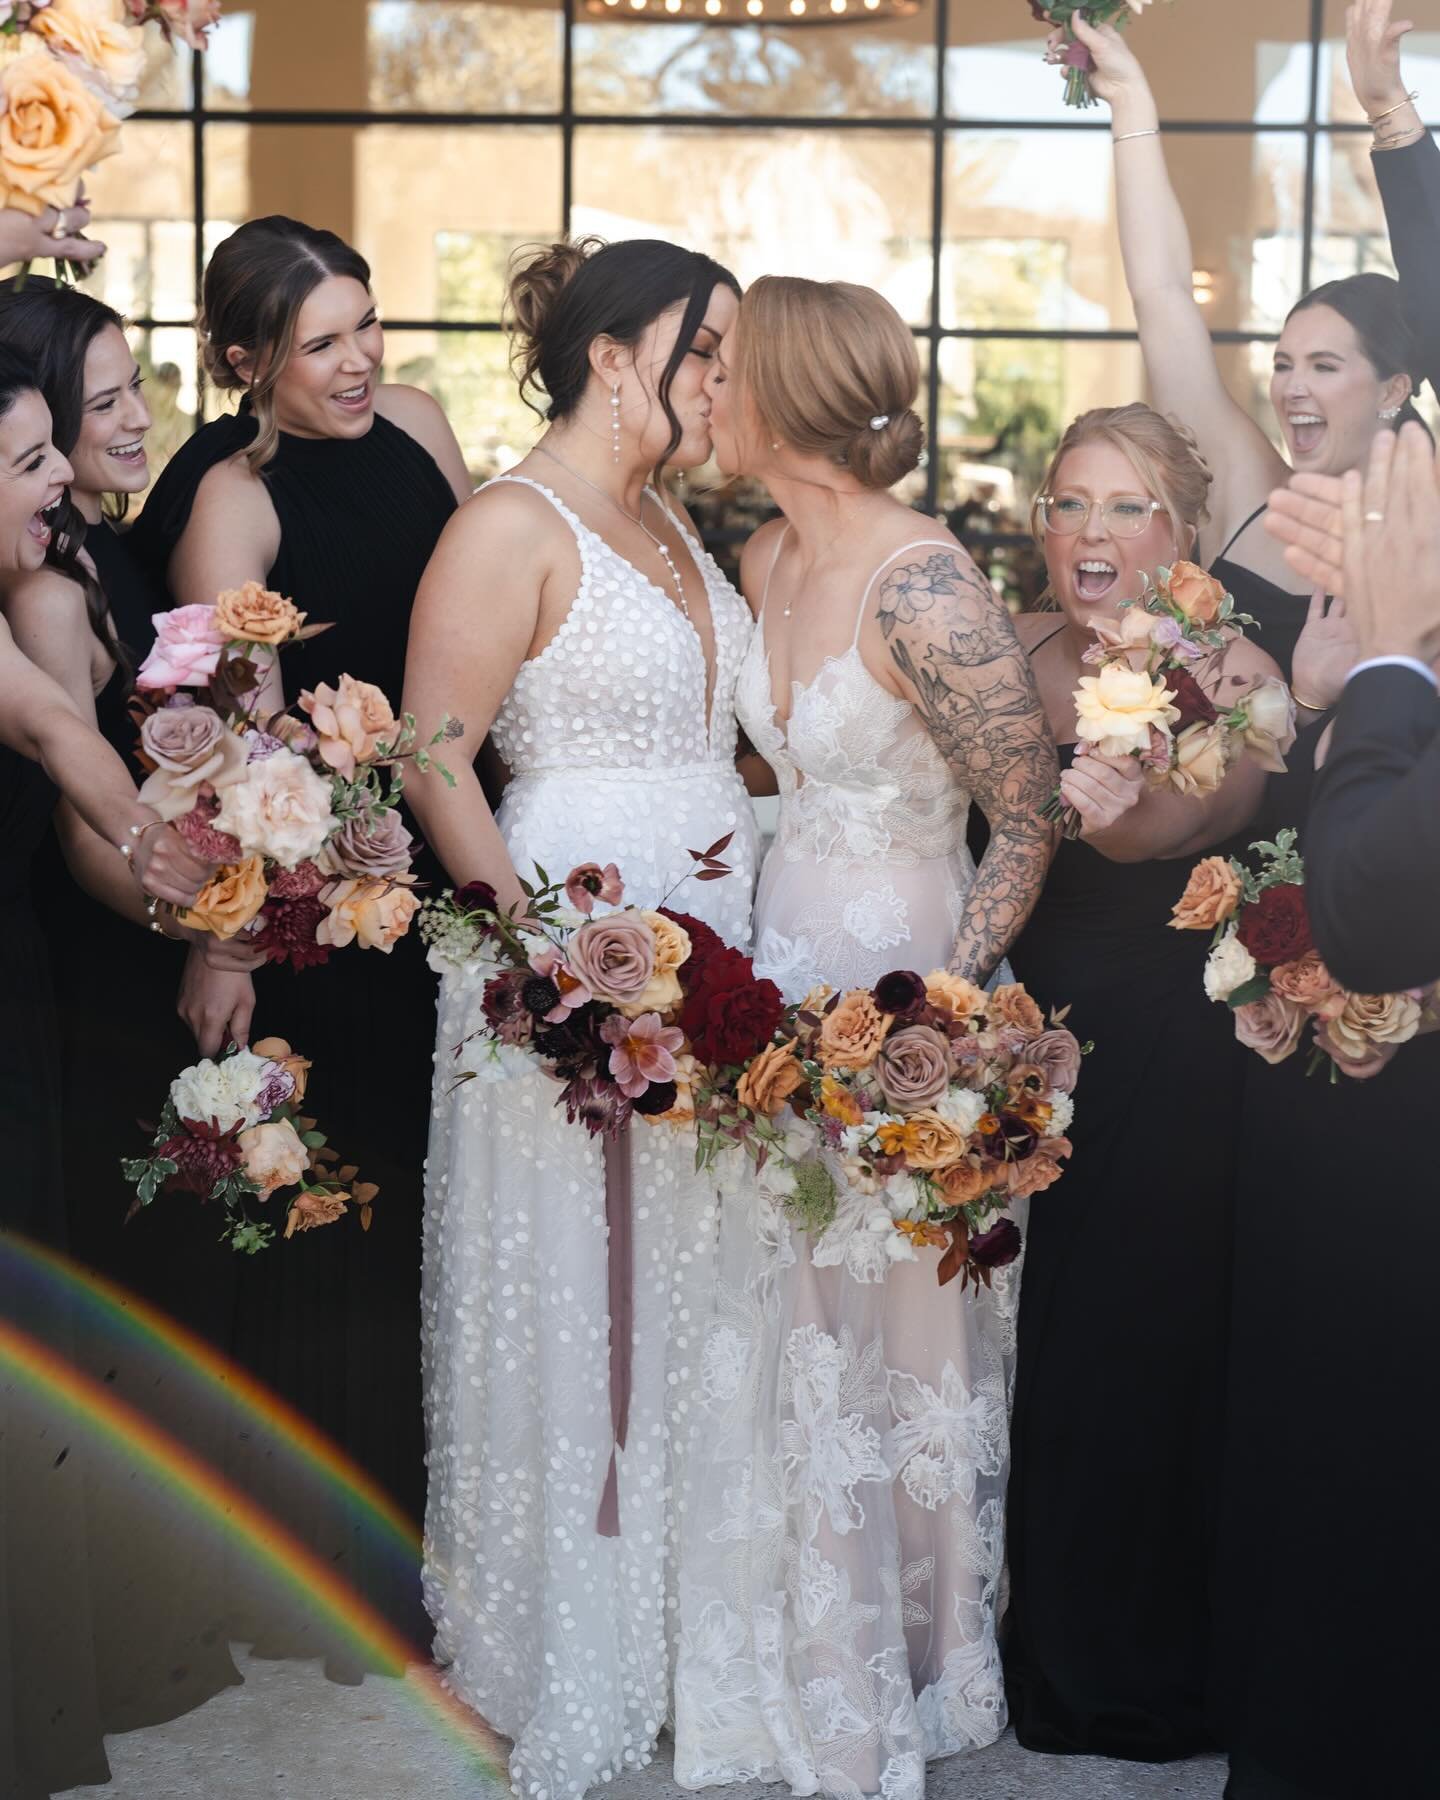 Brightening up your rainy day feed with all the feels from Amelie + Erin&rsquo;s wedding!

P.S. That little rainbow cameo has us absolutely SCREAMINGGG🌈

VENDOR TEAM: 
Cake + Dessert: @raynedesserts 
Catering + Bar: @austincatering 
Cigar Roller: @r